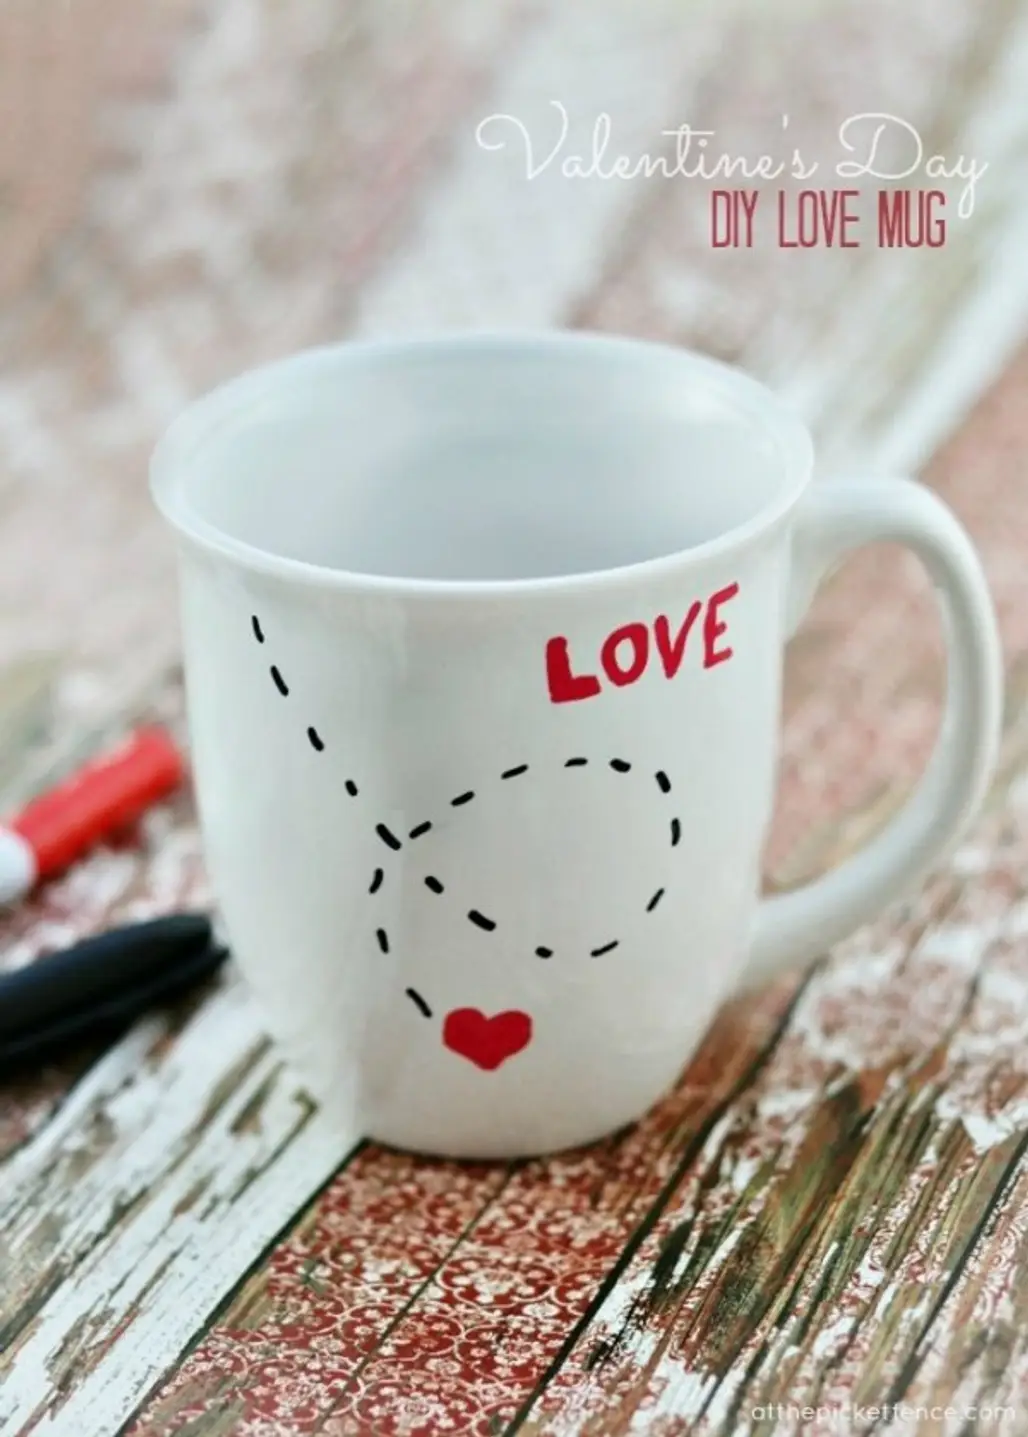 Get Busy with a Sharpie and Personalize a Mug